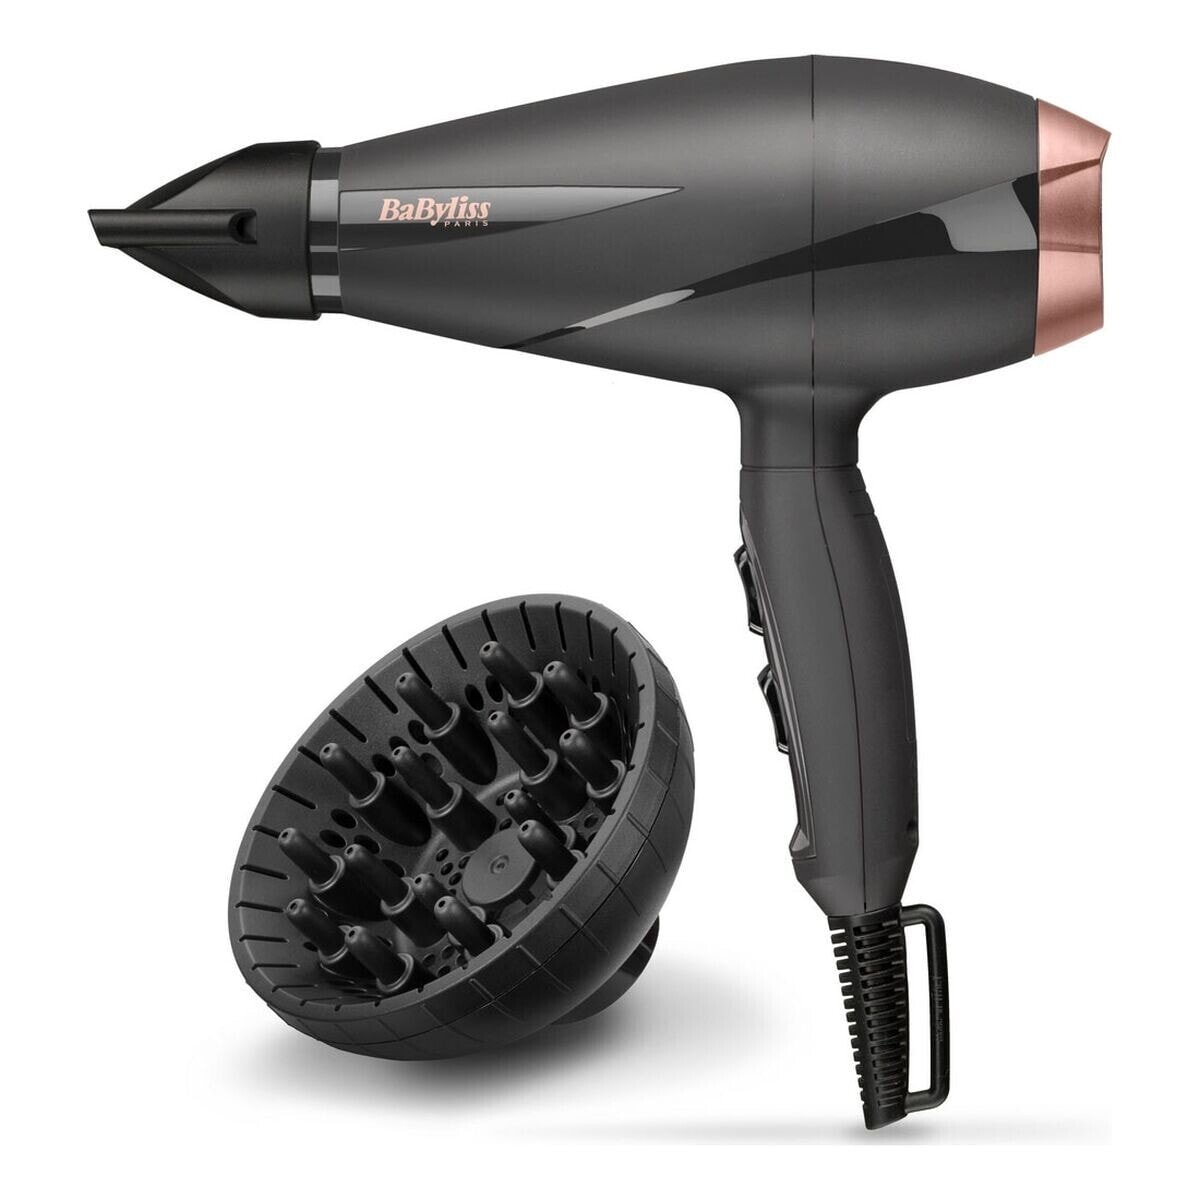 Hairdryer Babyliss Smooth Pro 2100